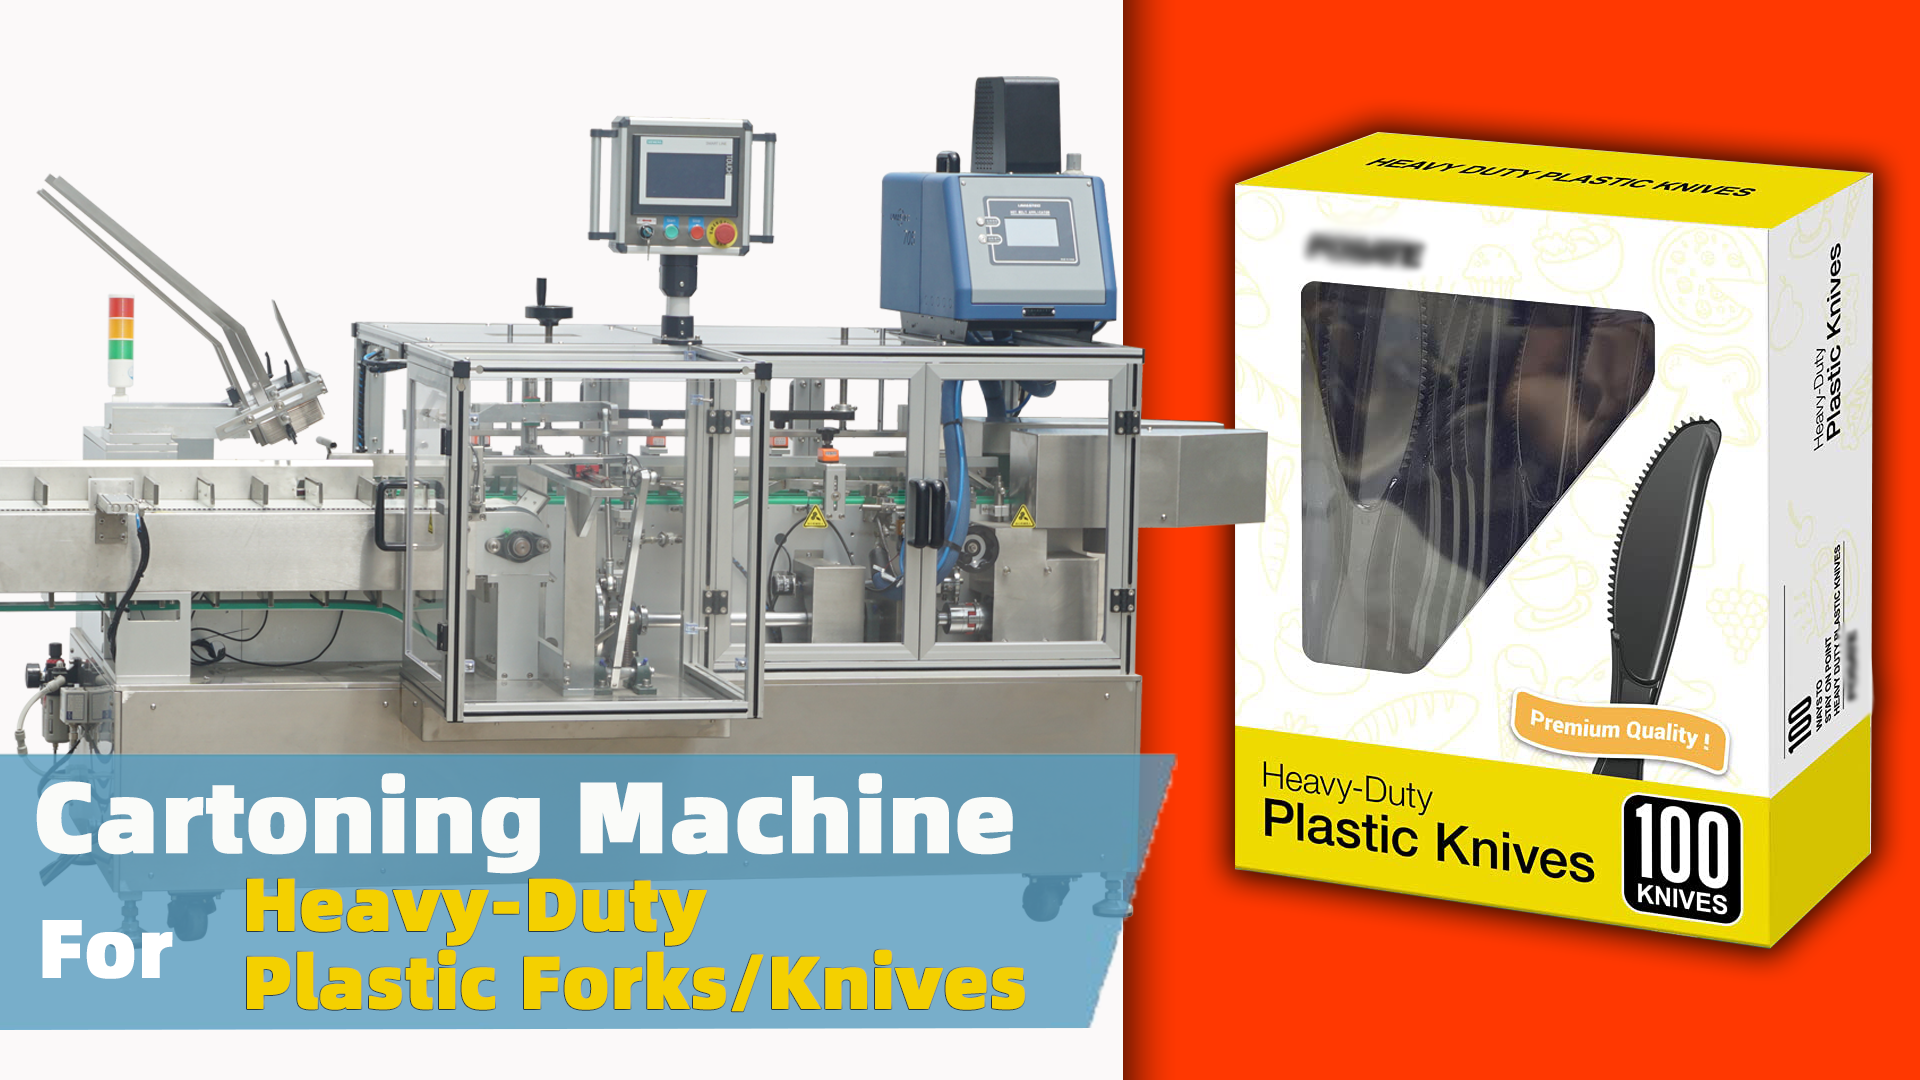 Automatic Cartoning Machine for Heavy Duty Plastic Knifes and Forks